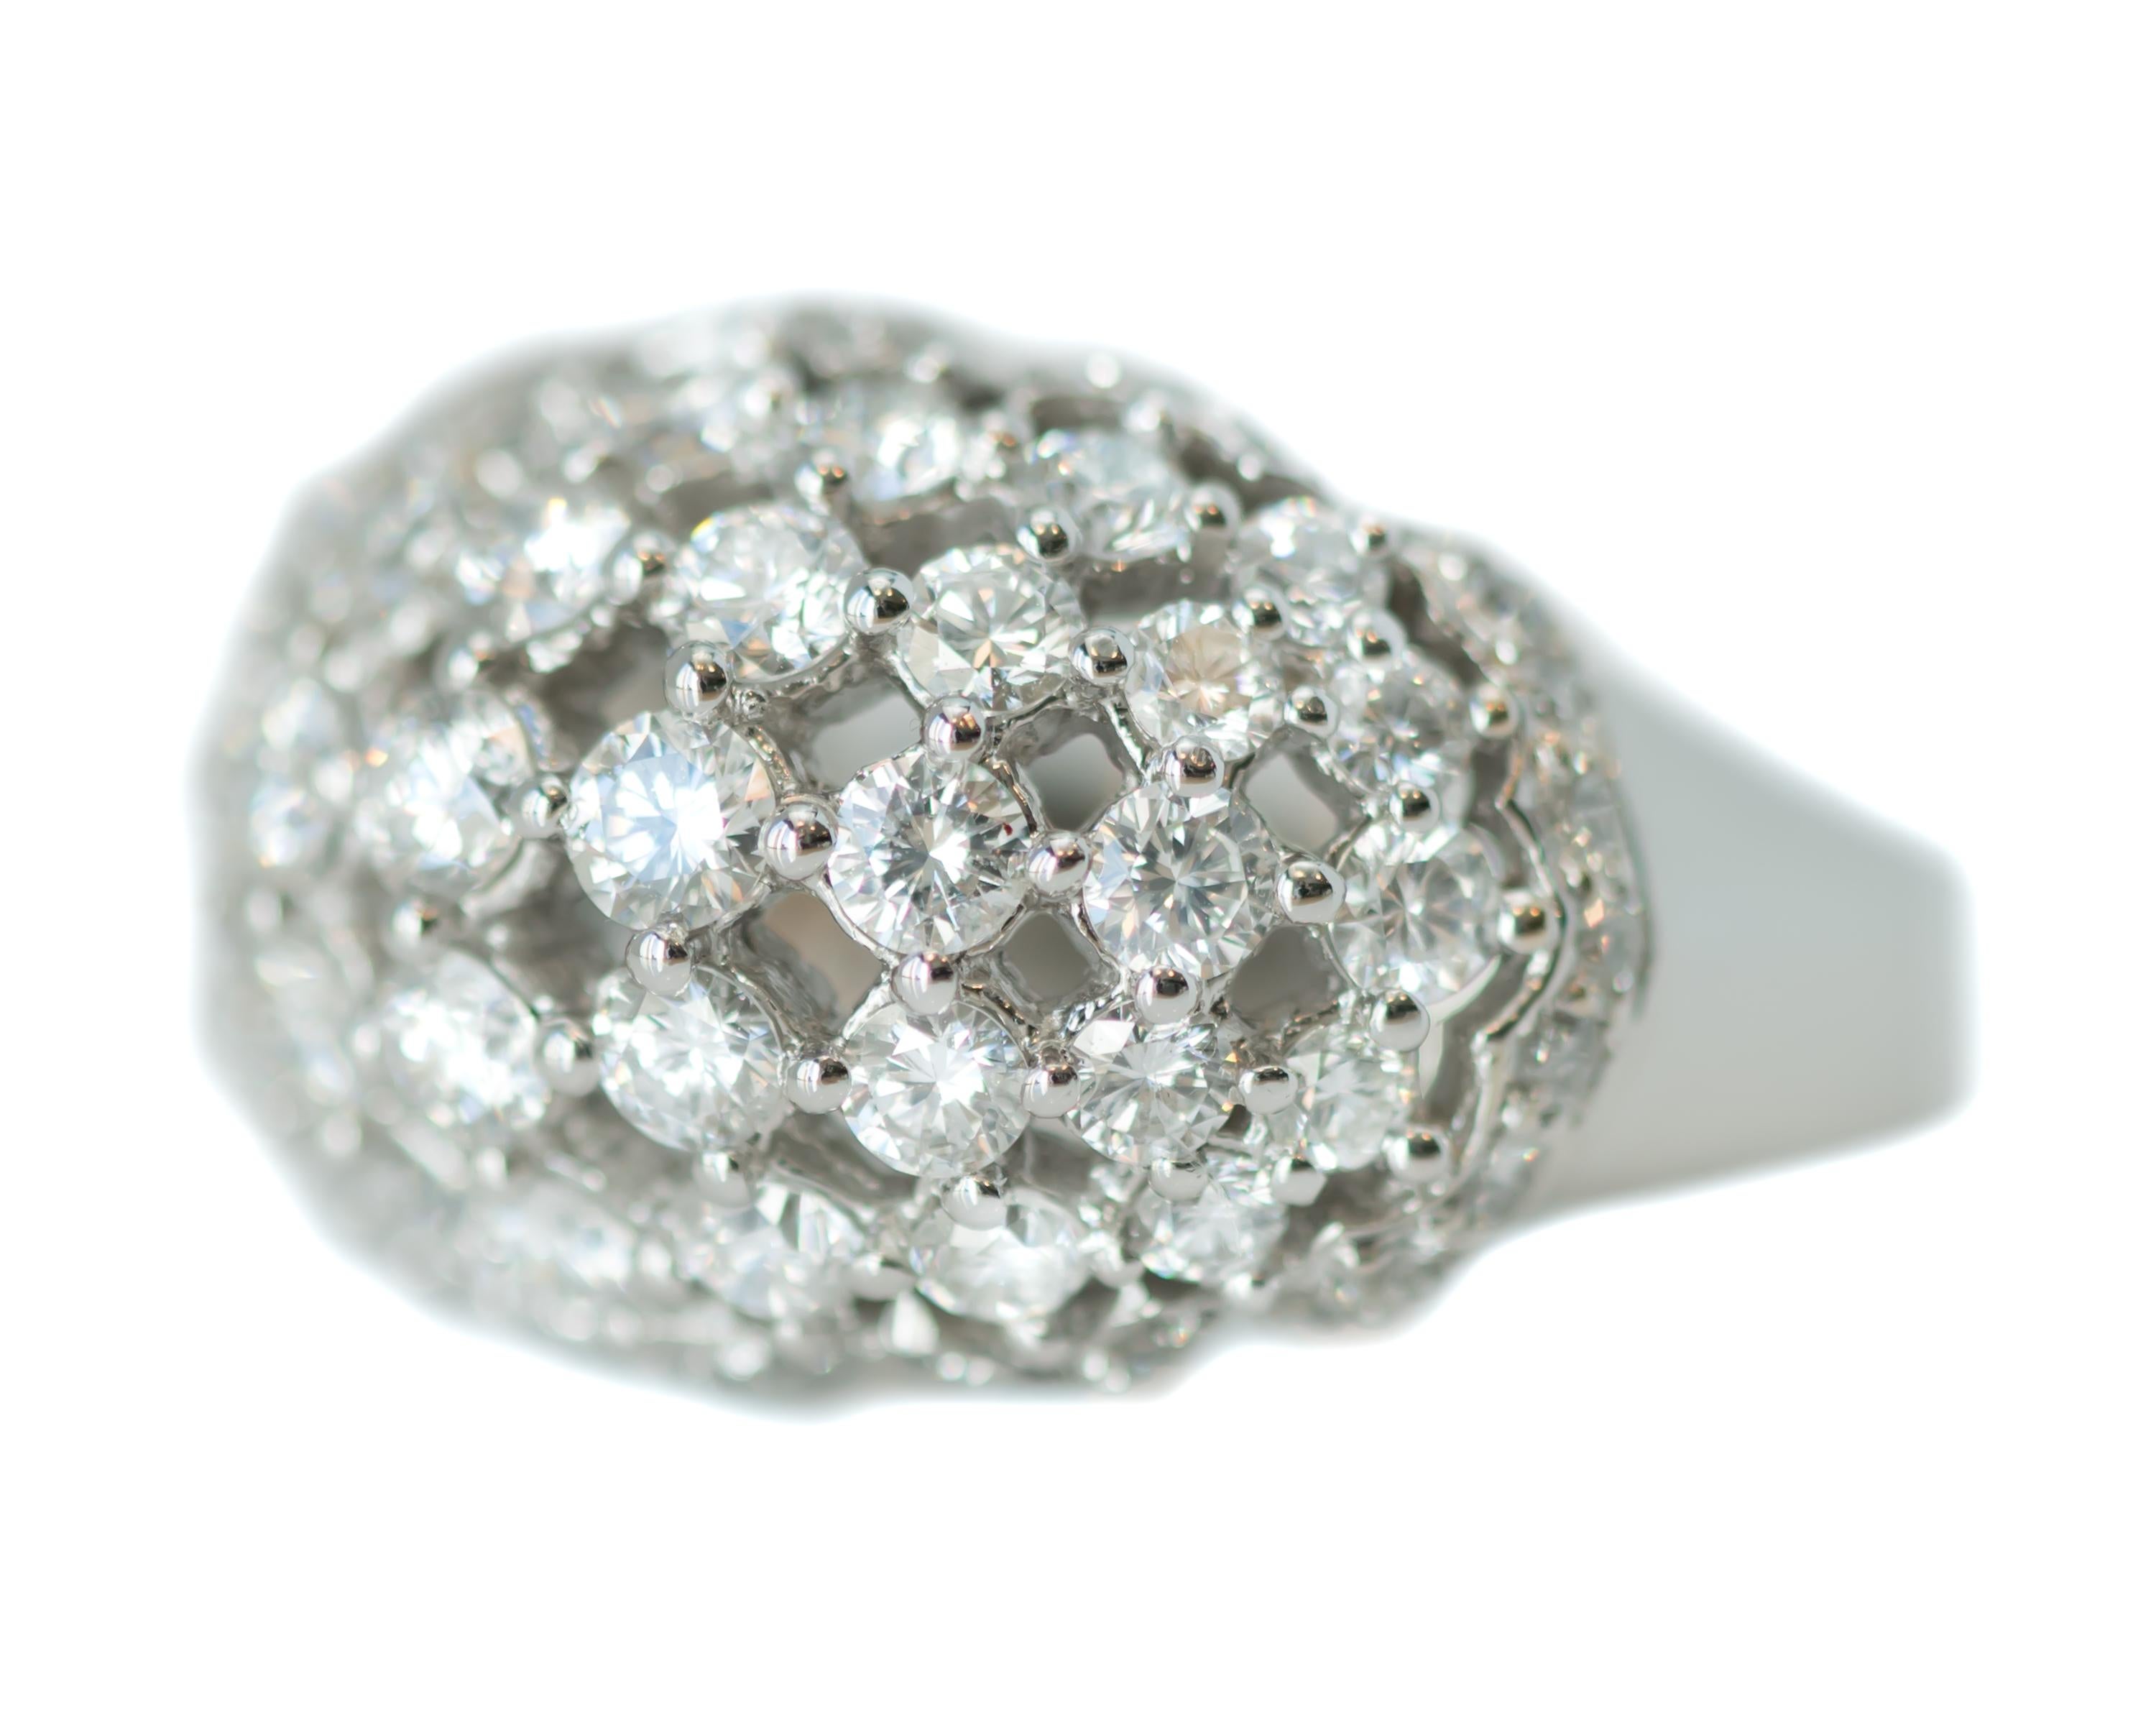 Women's 1950s 2.94 Carat Diamond and 18 Karat White Gold Dome Ring For Sale